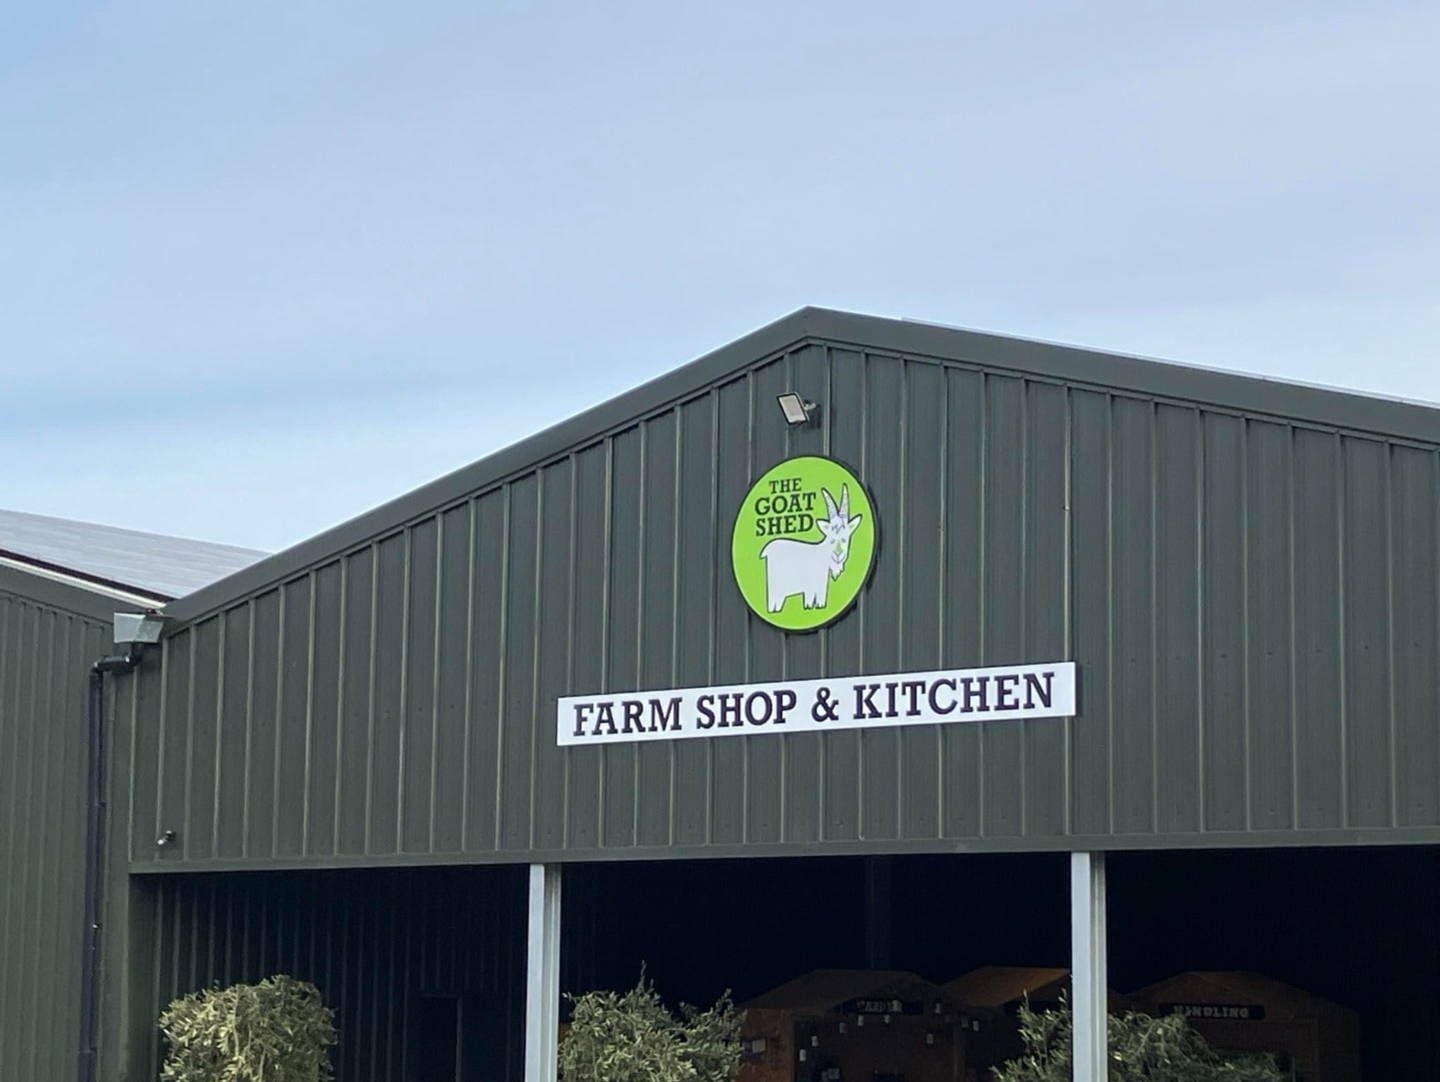 The roof of The Goat Shed farm shop. The roof is dark green and triangular. The Goat Shed logo is on there, a white goat in a green circle